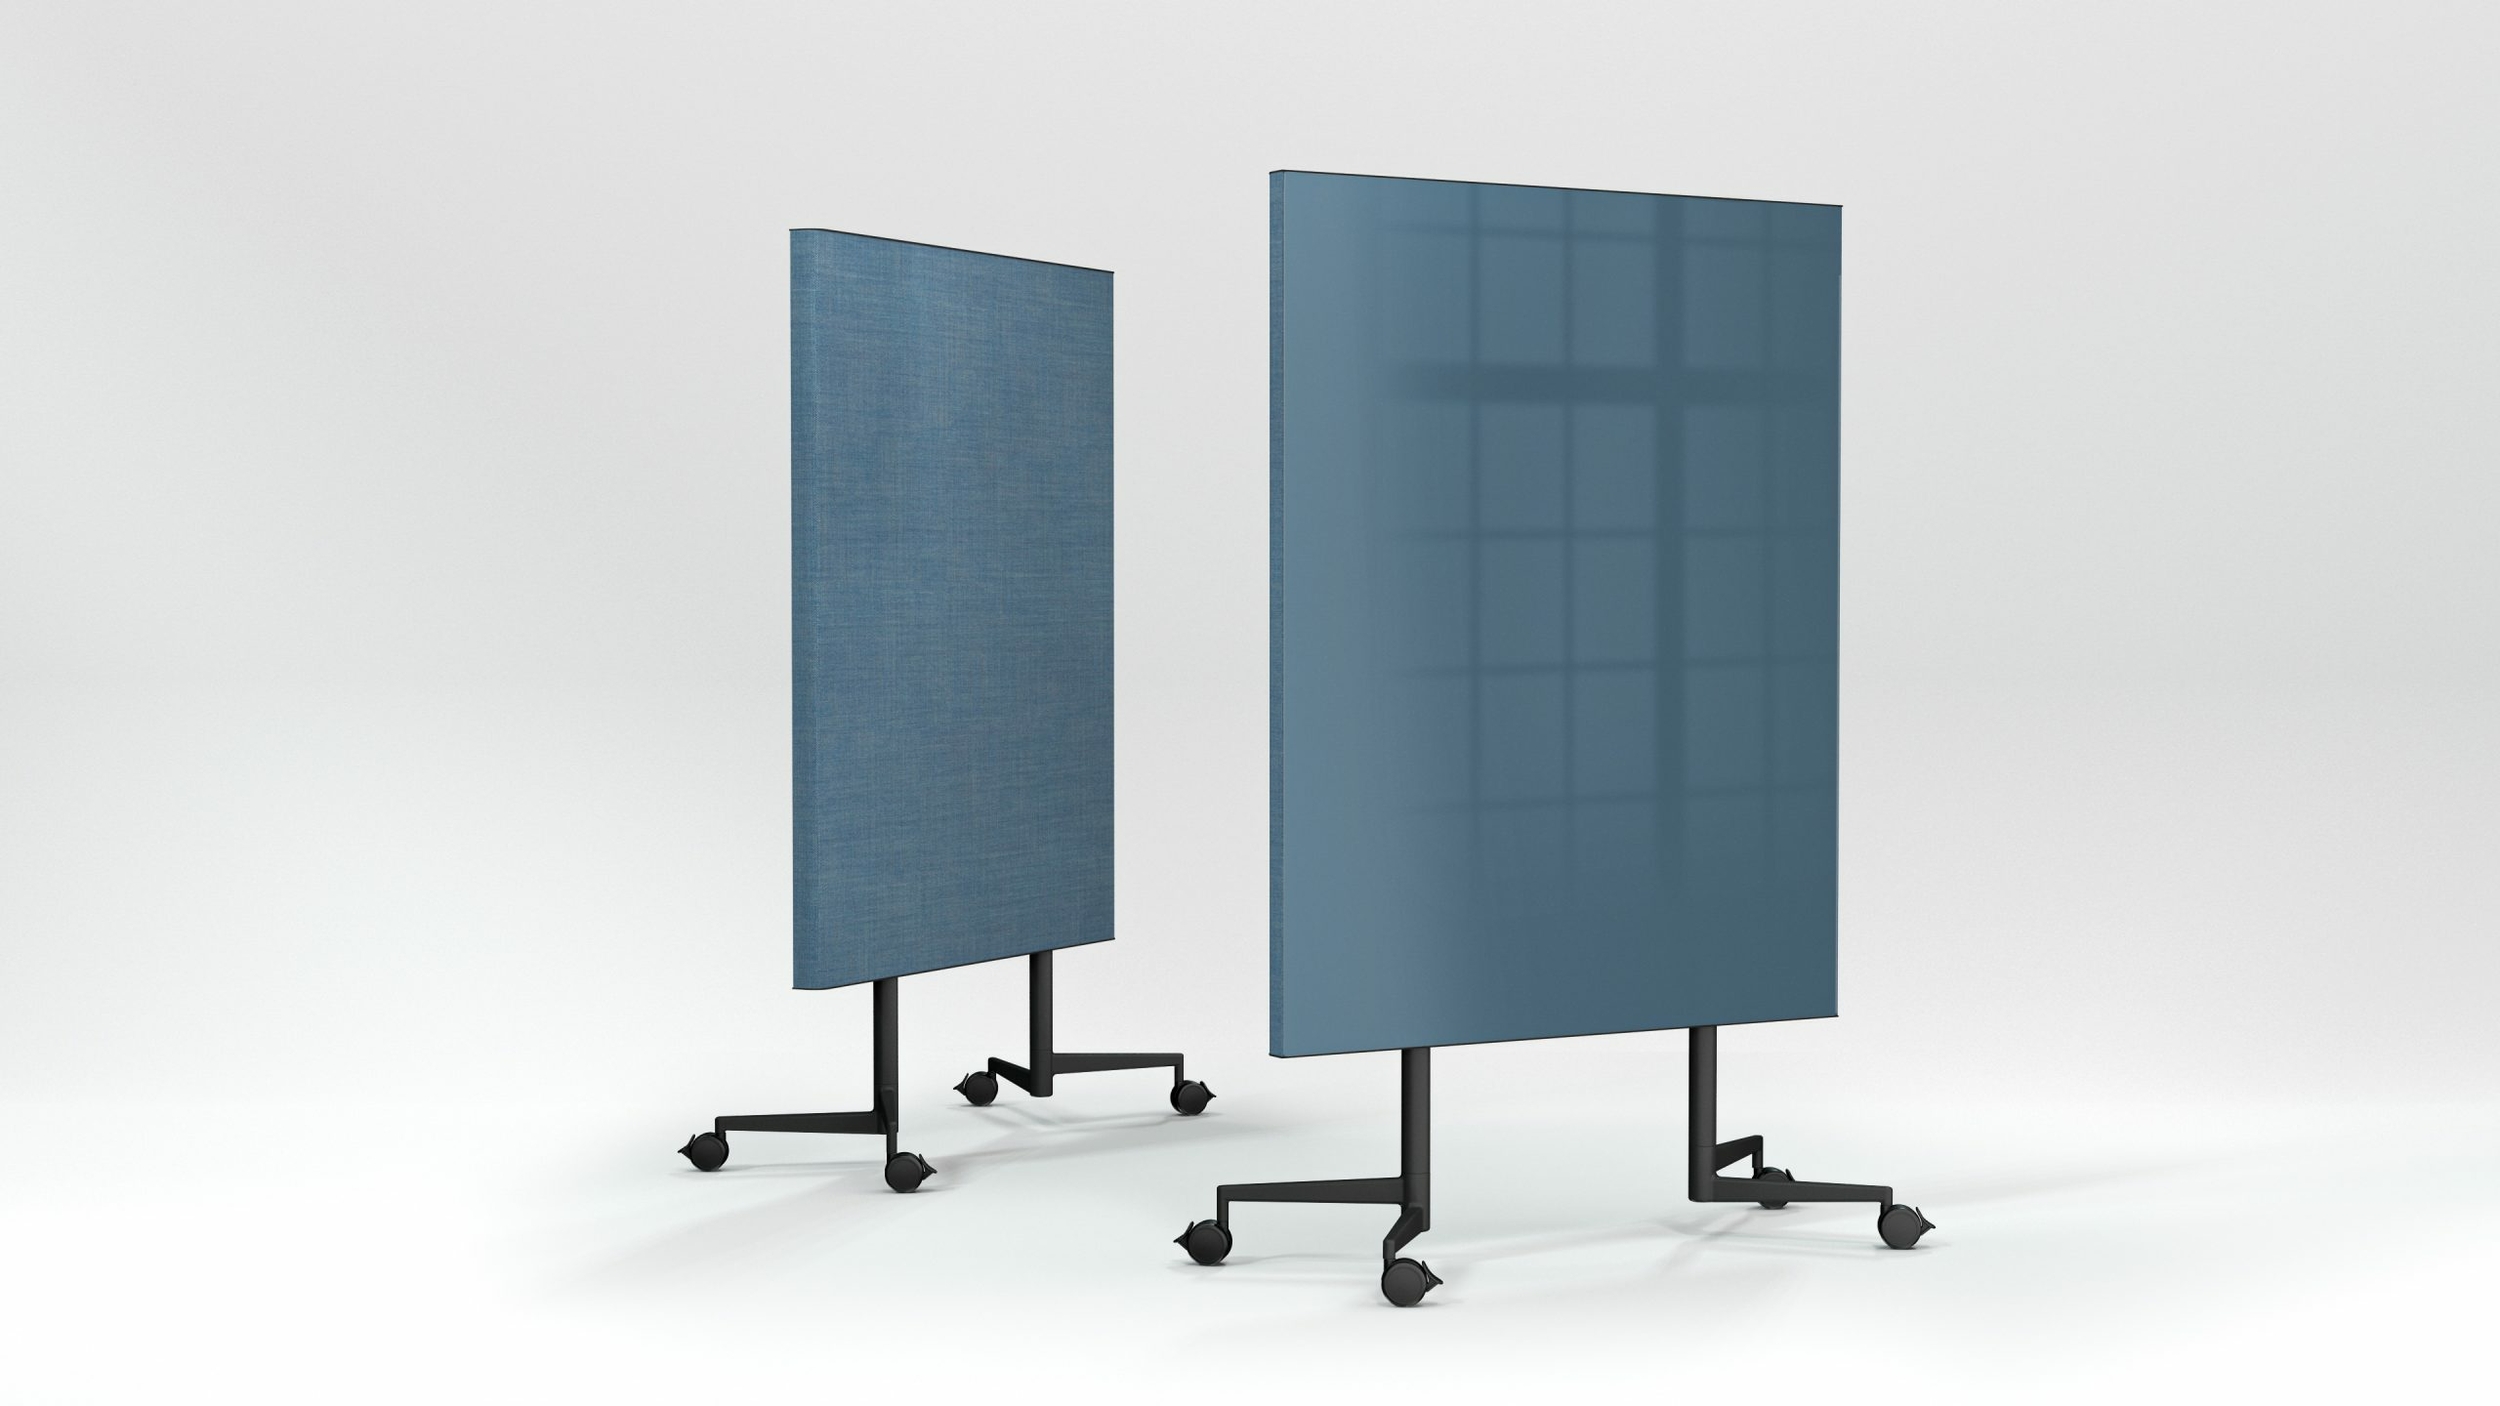 CHAT-BOARD-NEW-MOVE-Denim-Remix-Screen-0818-front-and-back-render-scaled